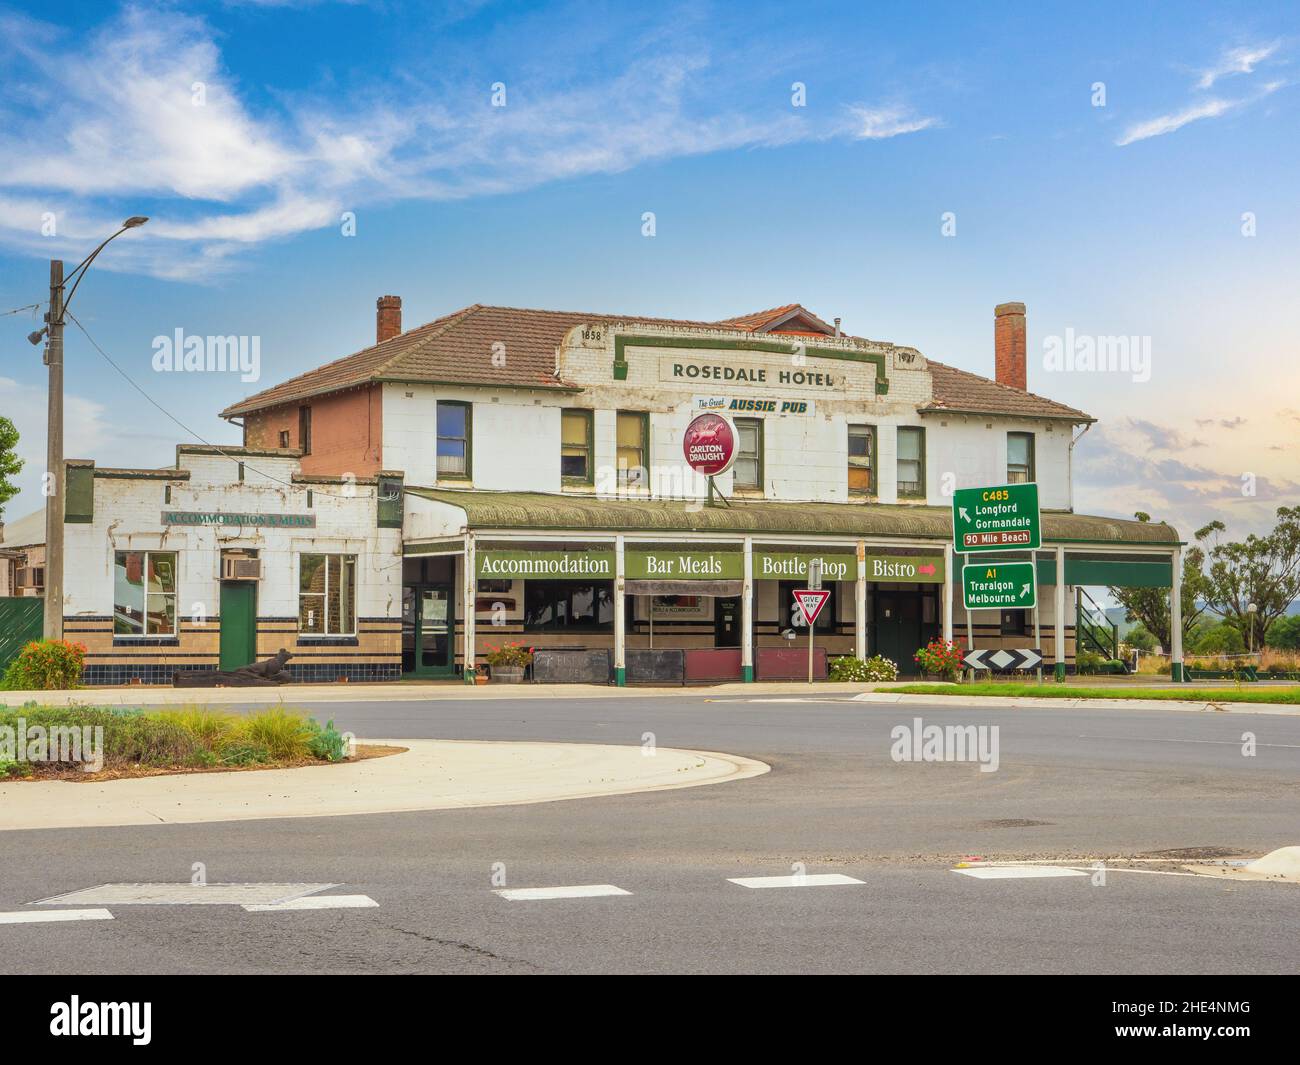 Rosedale Hotel, a building constructed in 1858, is a classic Australian pub in regional Victoria. Rosedale, Gippsland, Victoria, Australia. Stock Photo